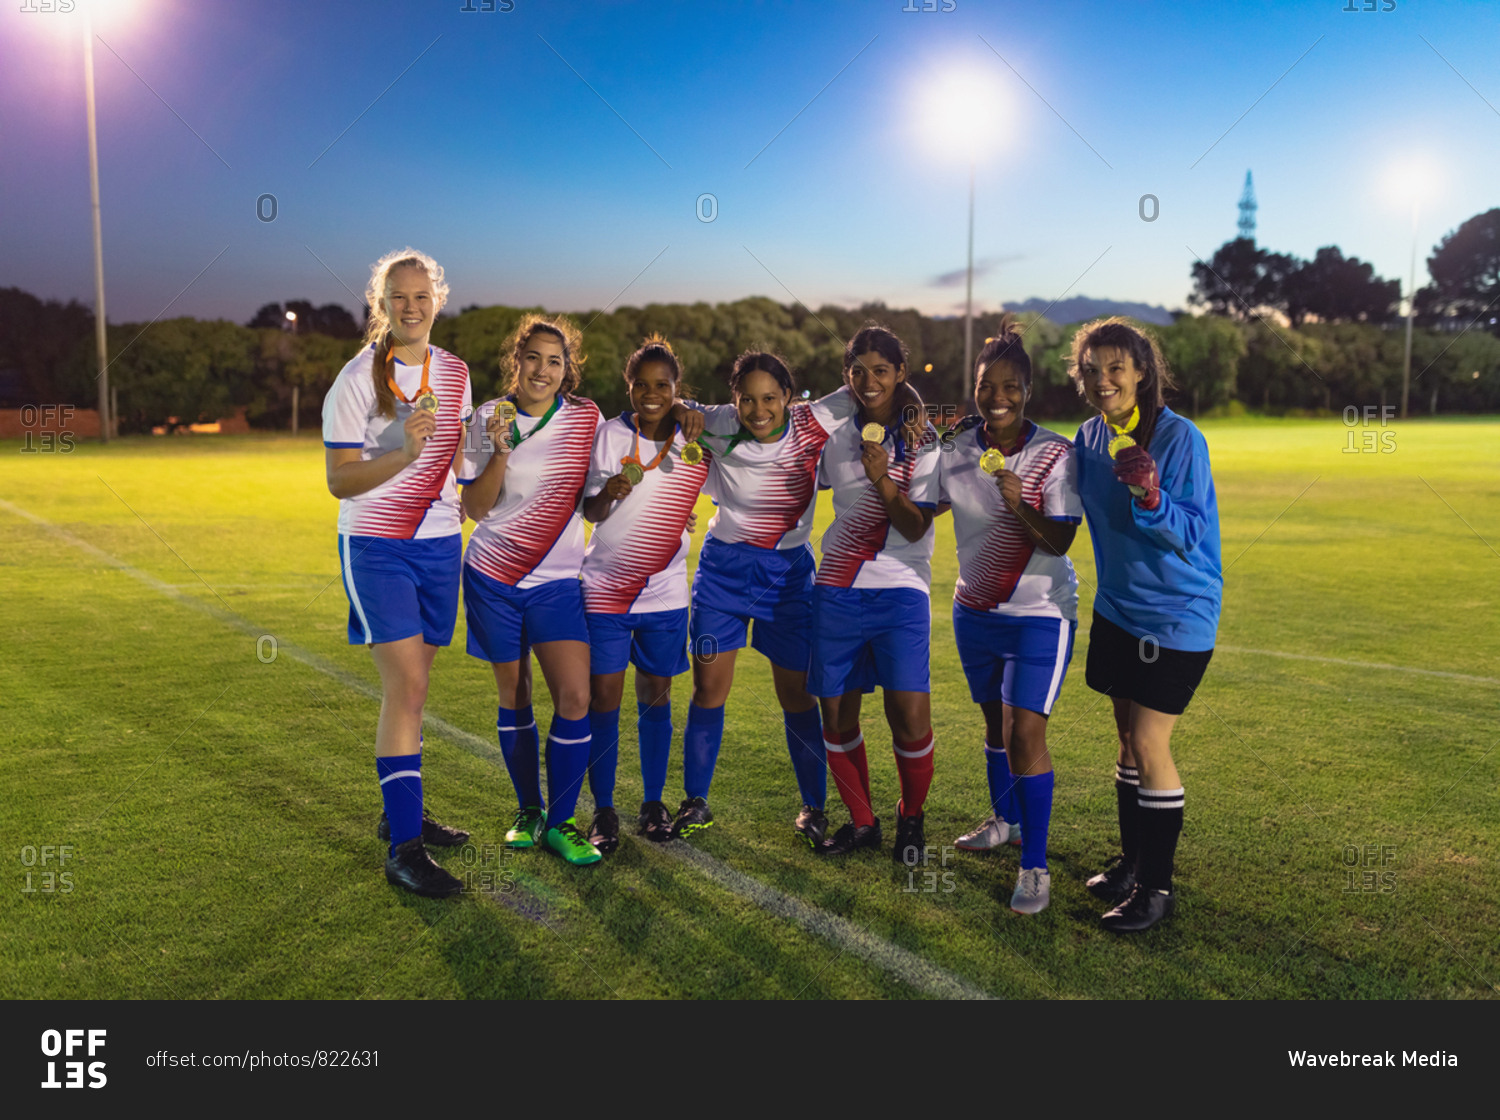 Front view of diverse female soccer team posing with medal at sports field